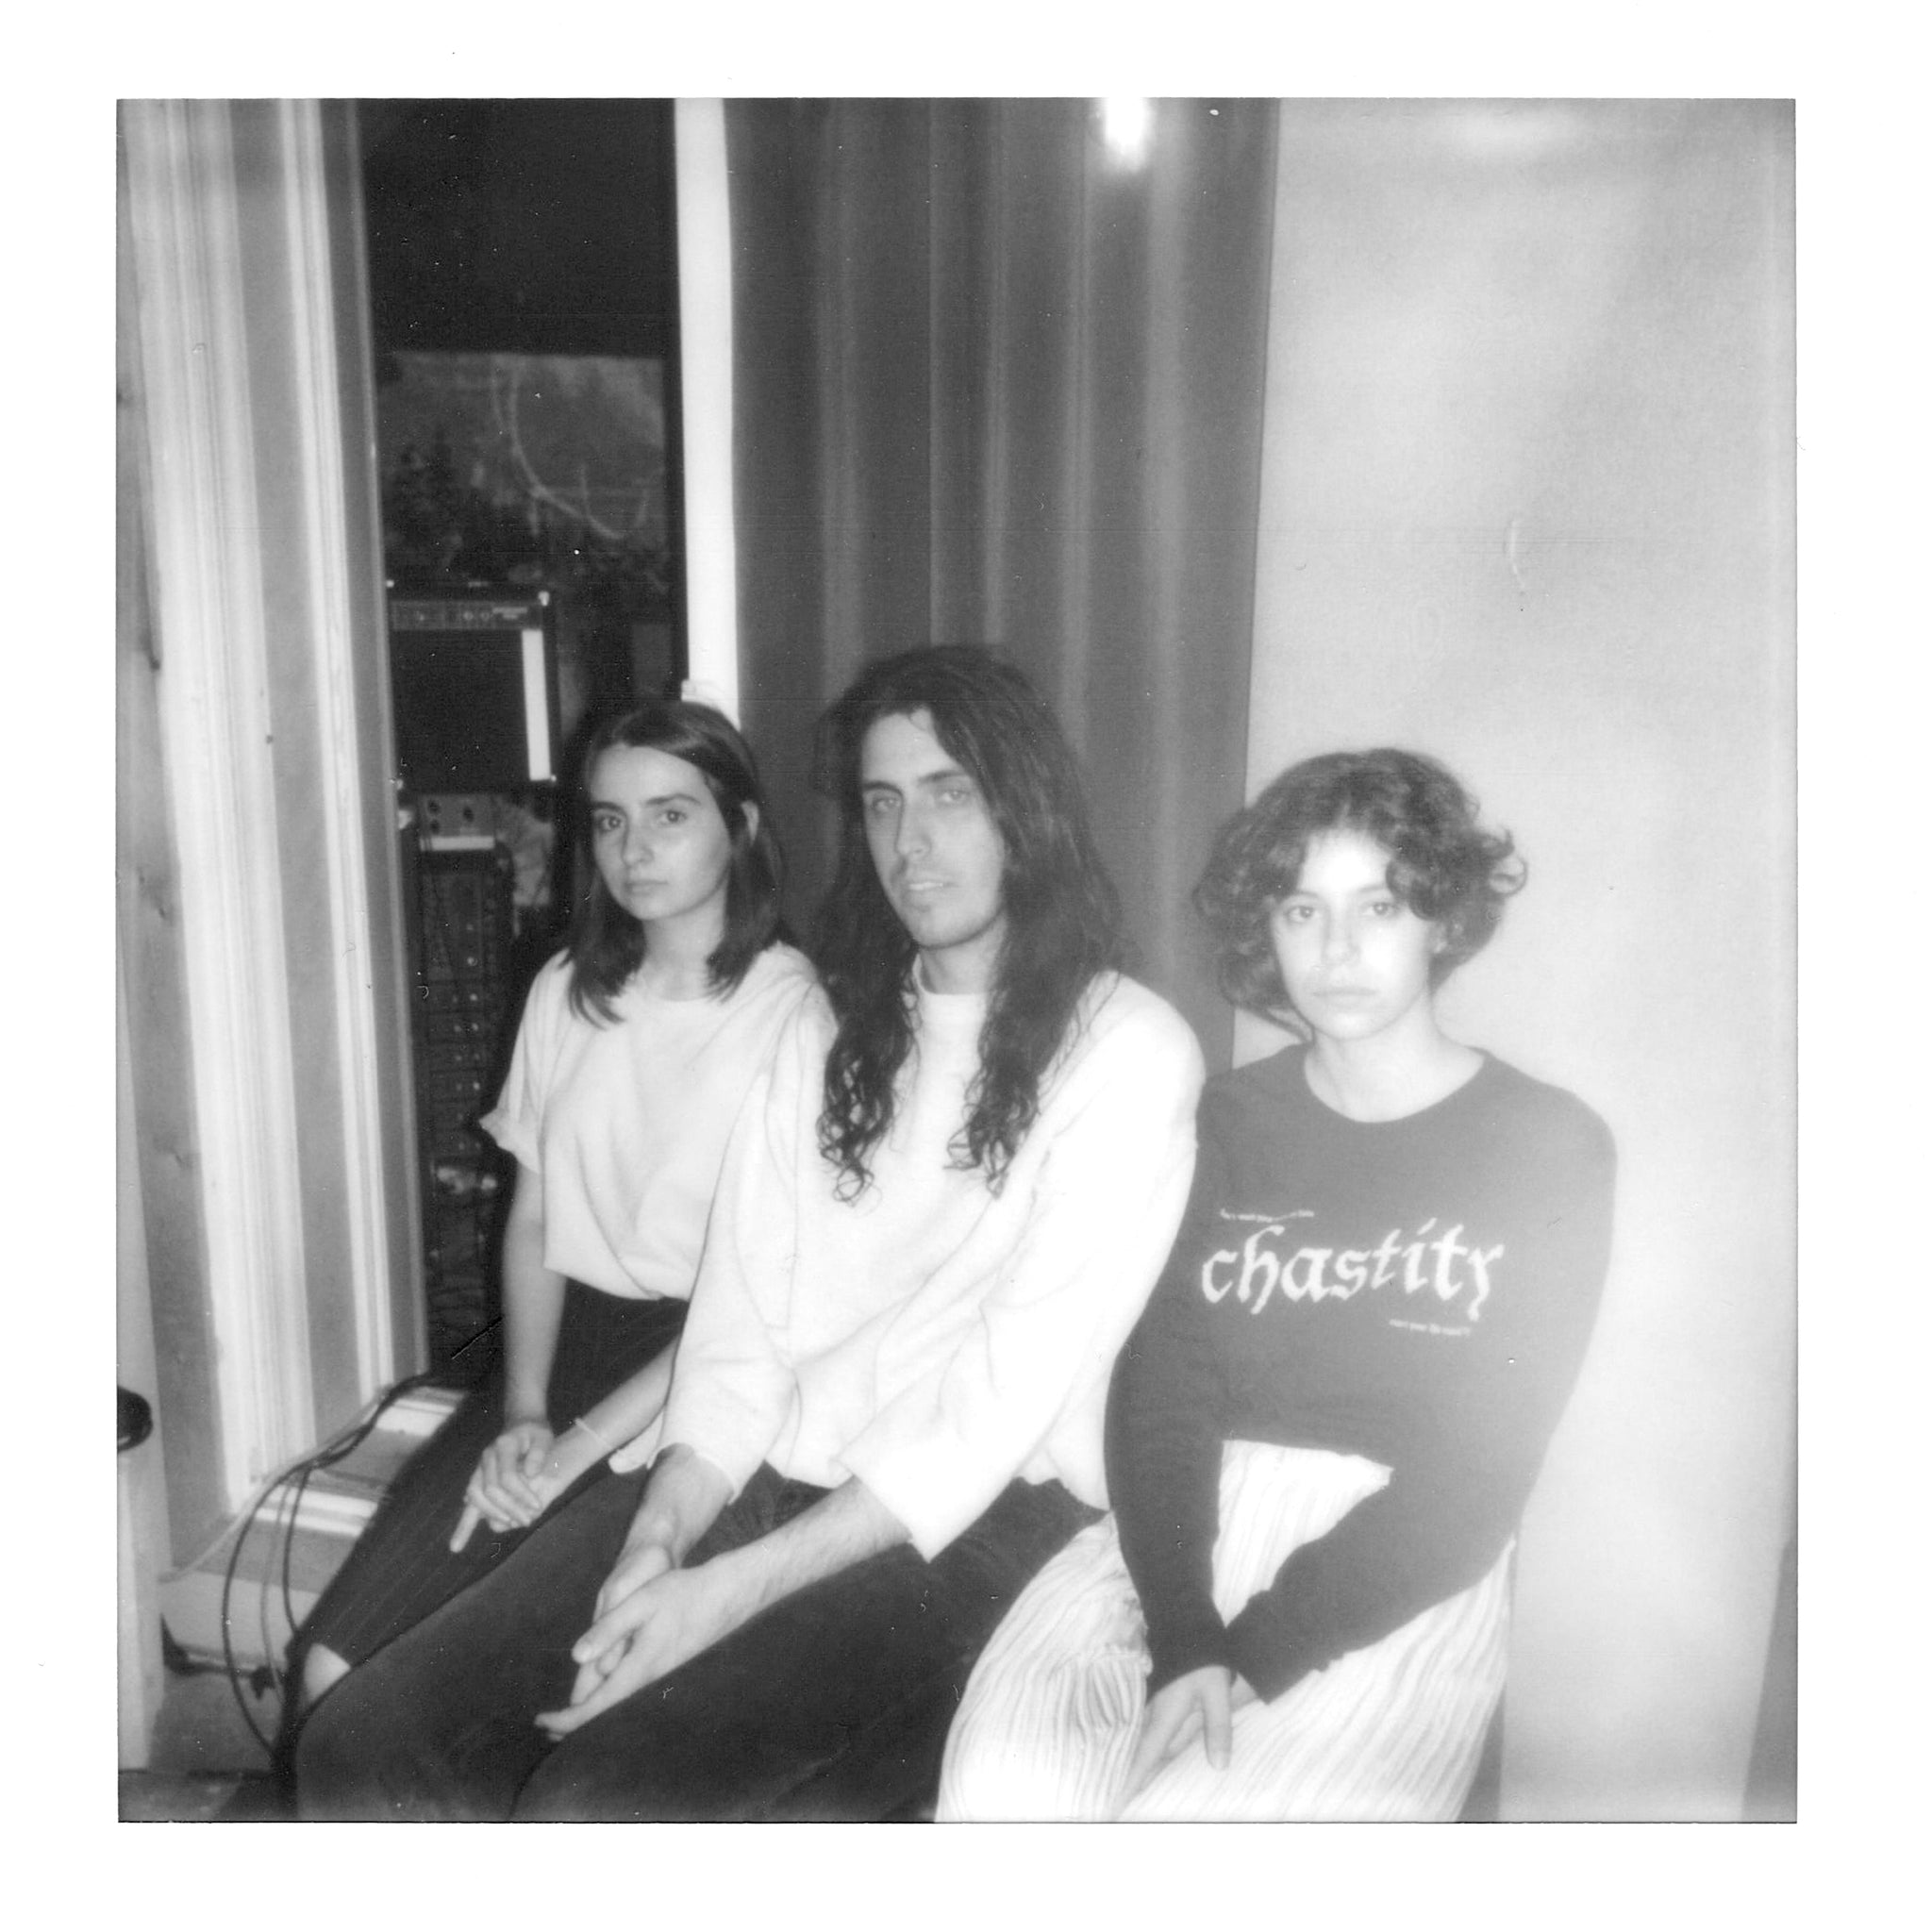 MOURN AND CHASTITY "SUN"